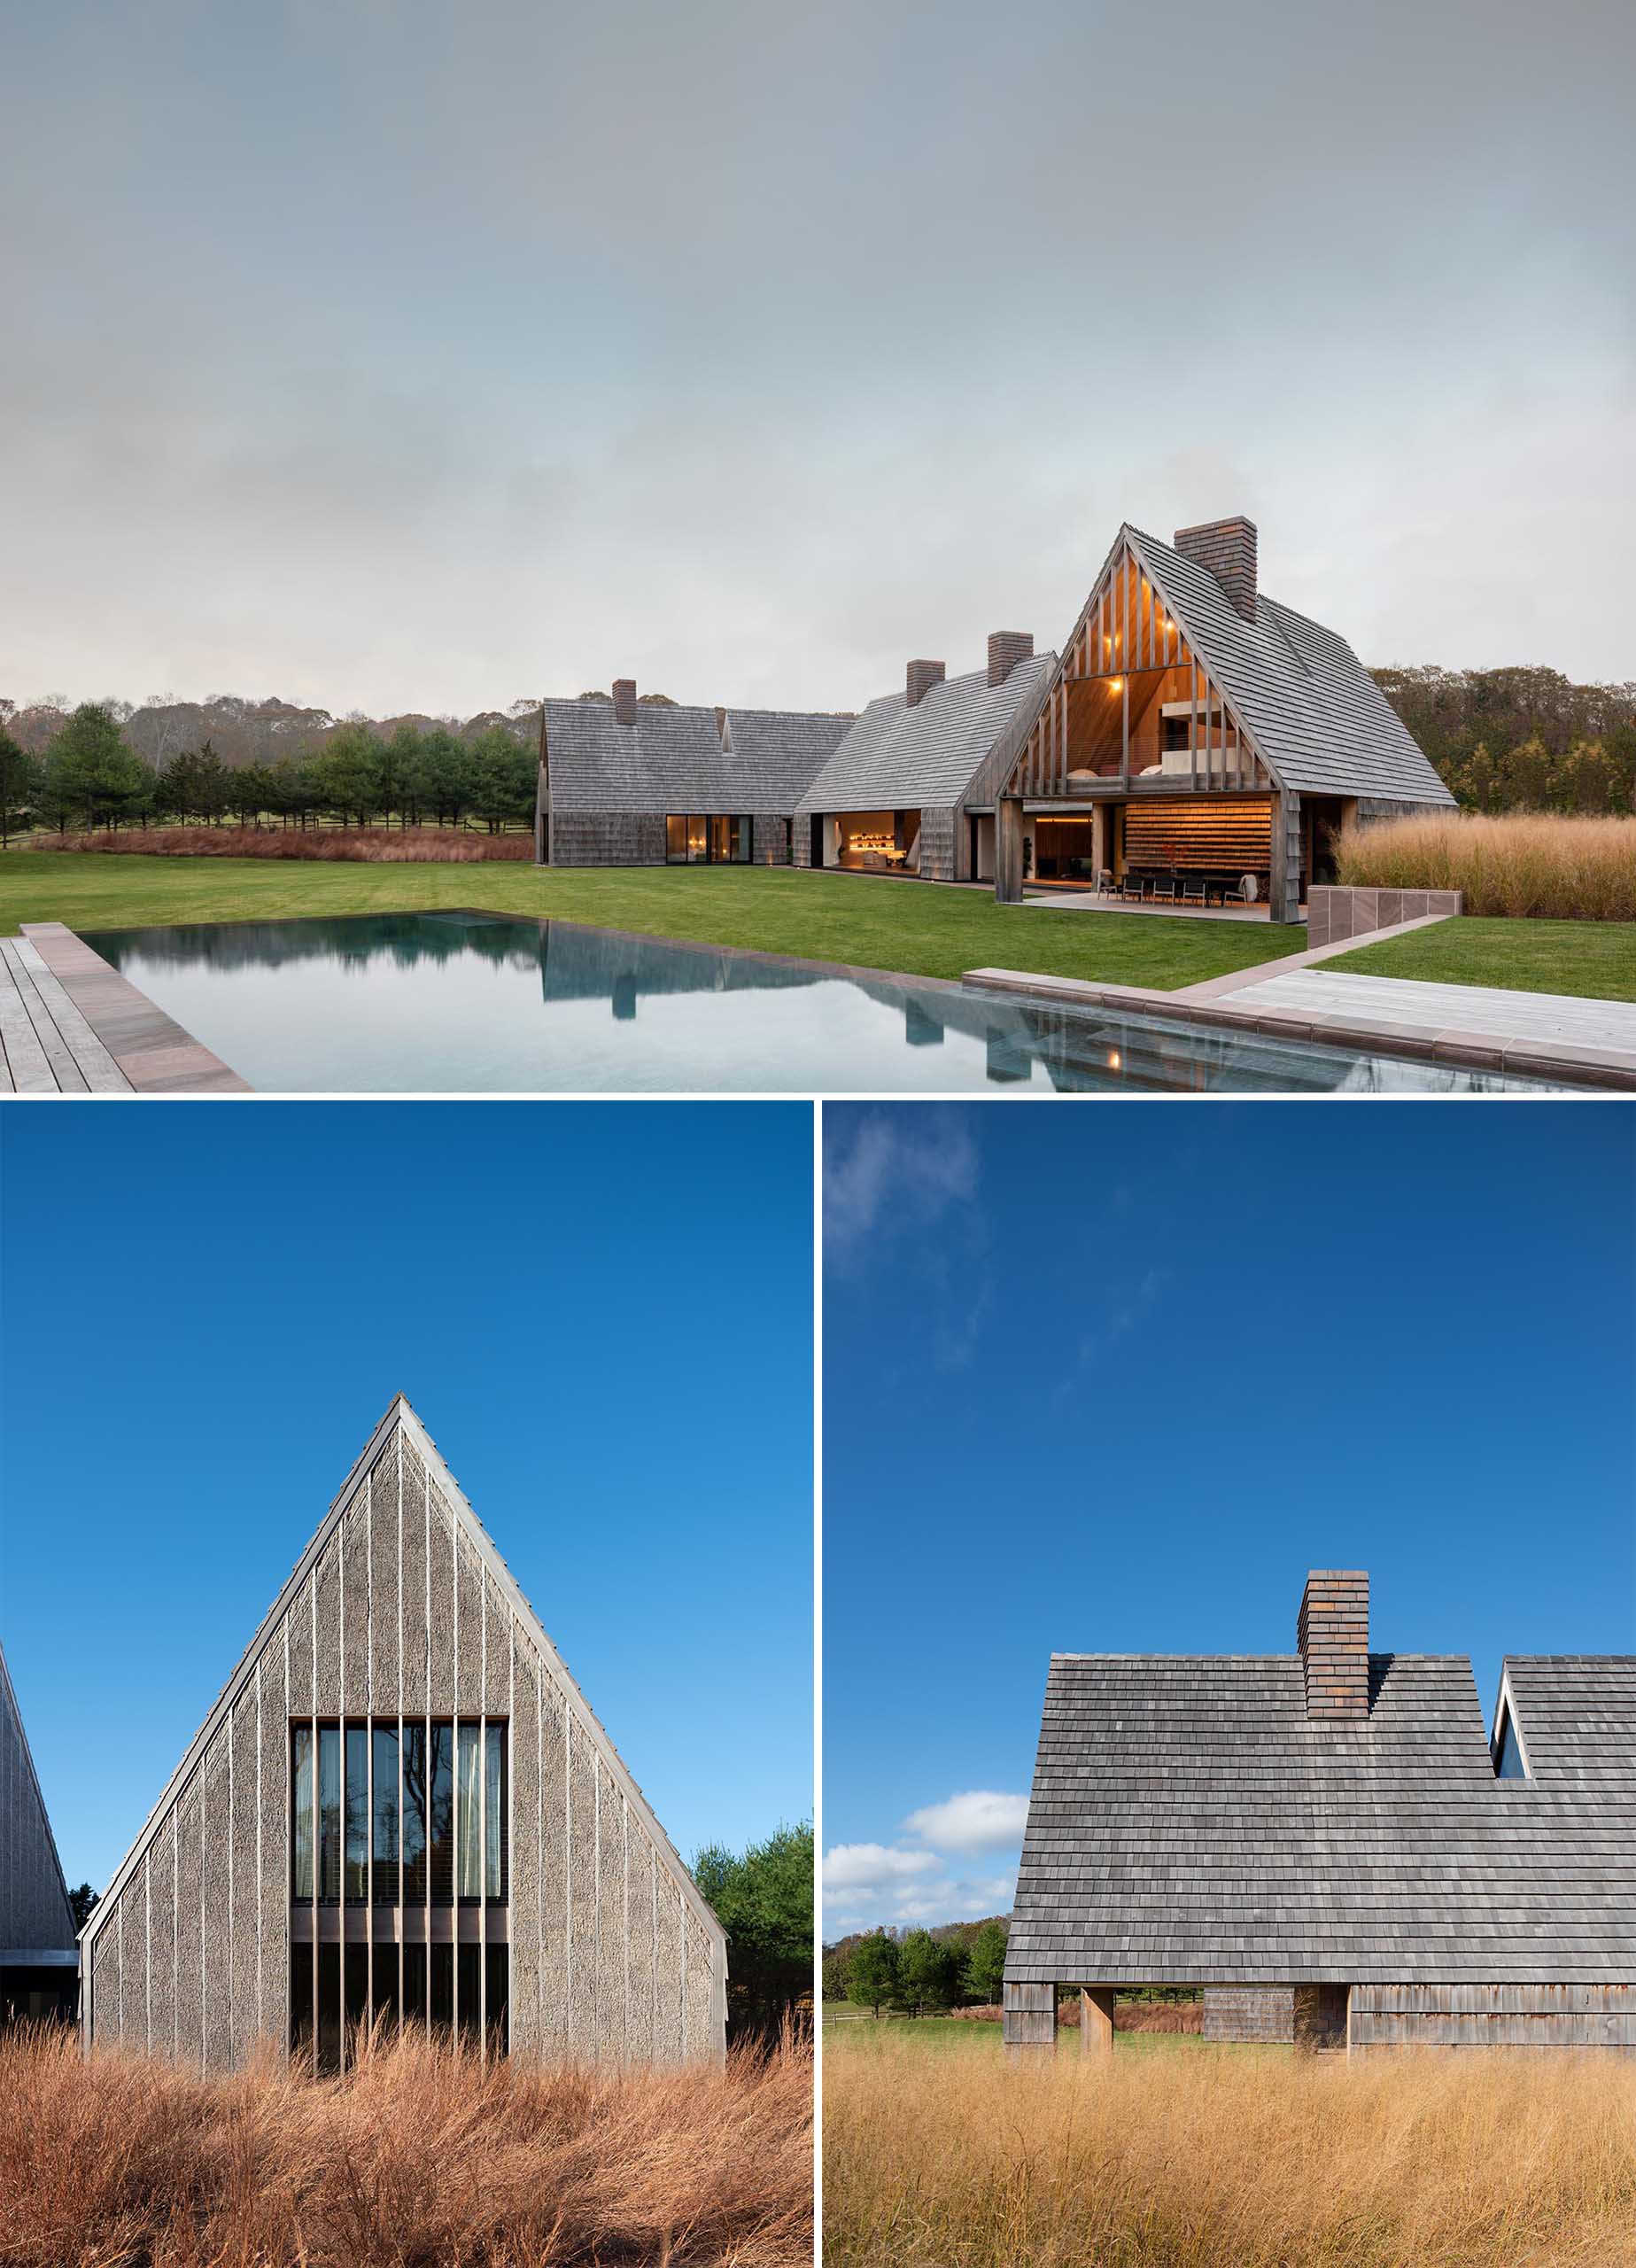 The weathered wood shingle siding that covers this modern home, while the traditional thatch siding is packed neatly between the exposed exterior framing and makes reference to the grasses of the pasture.